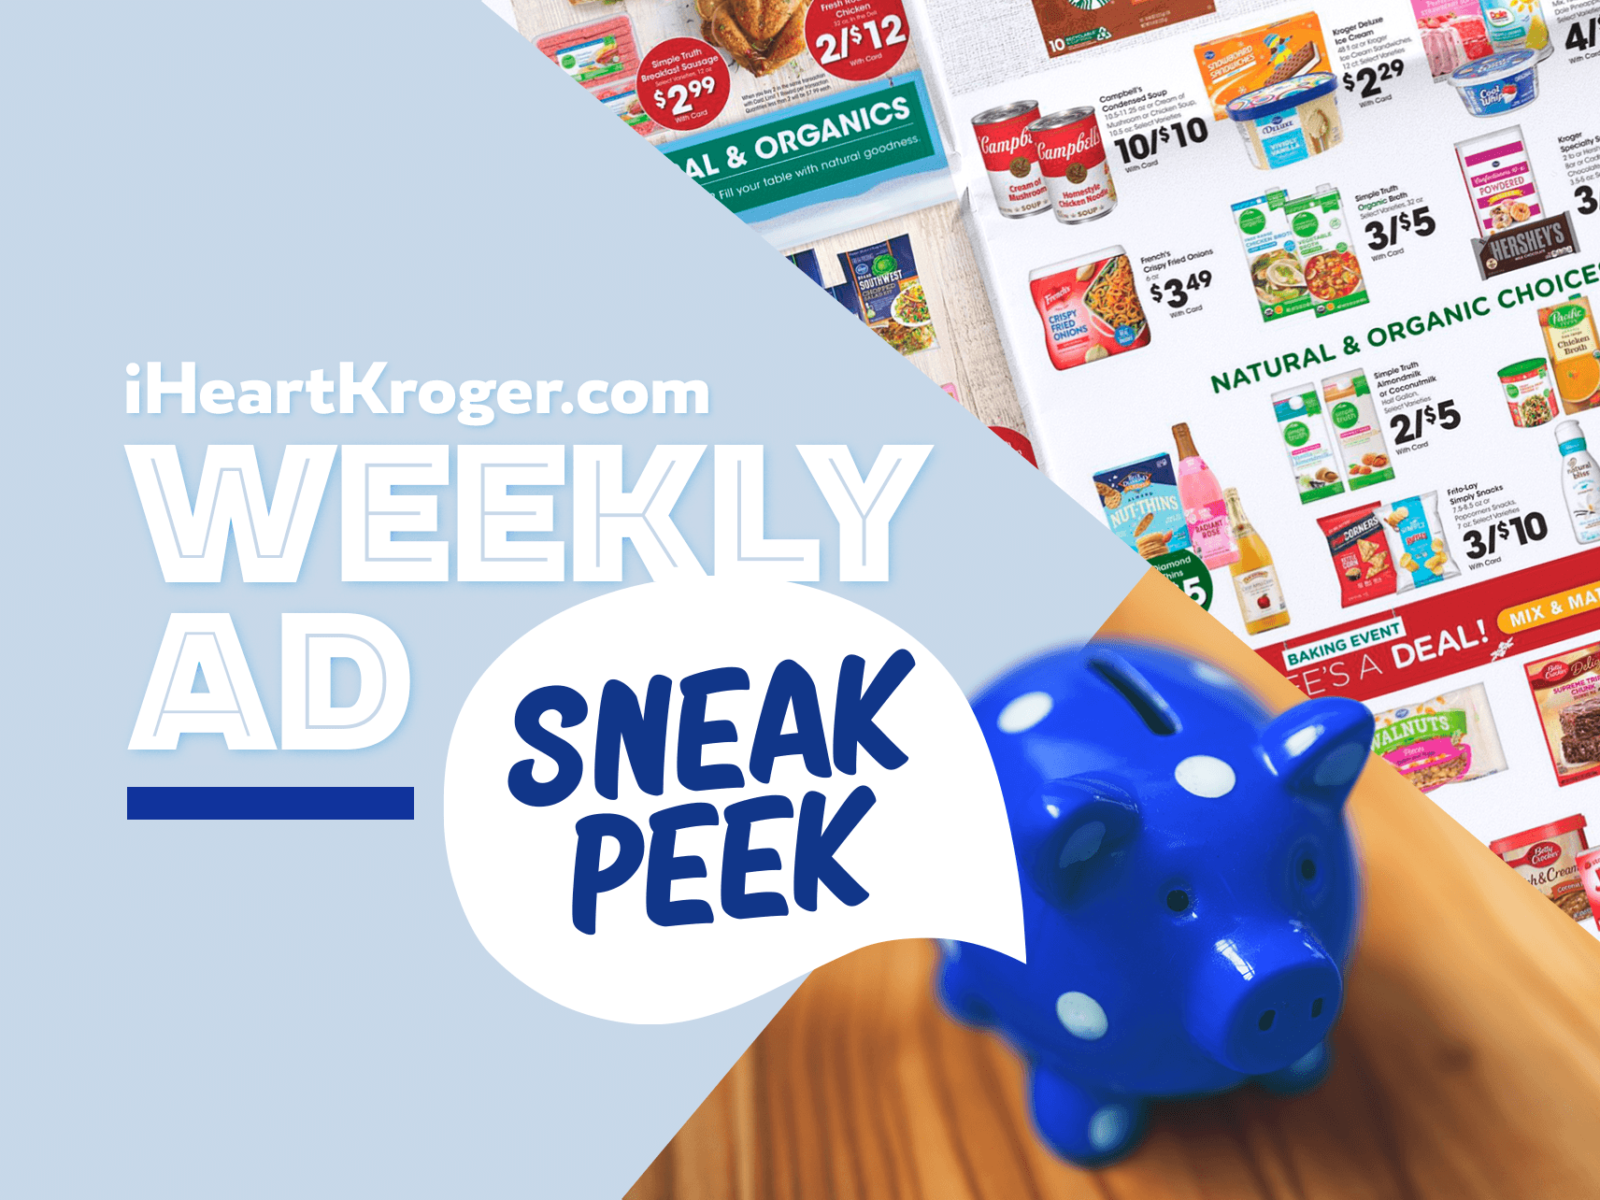 Kroger Ad & Coupons Week Of 2/22 to 2/28